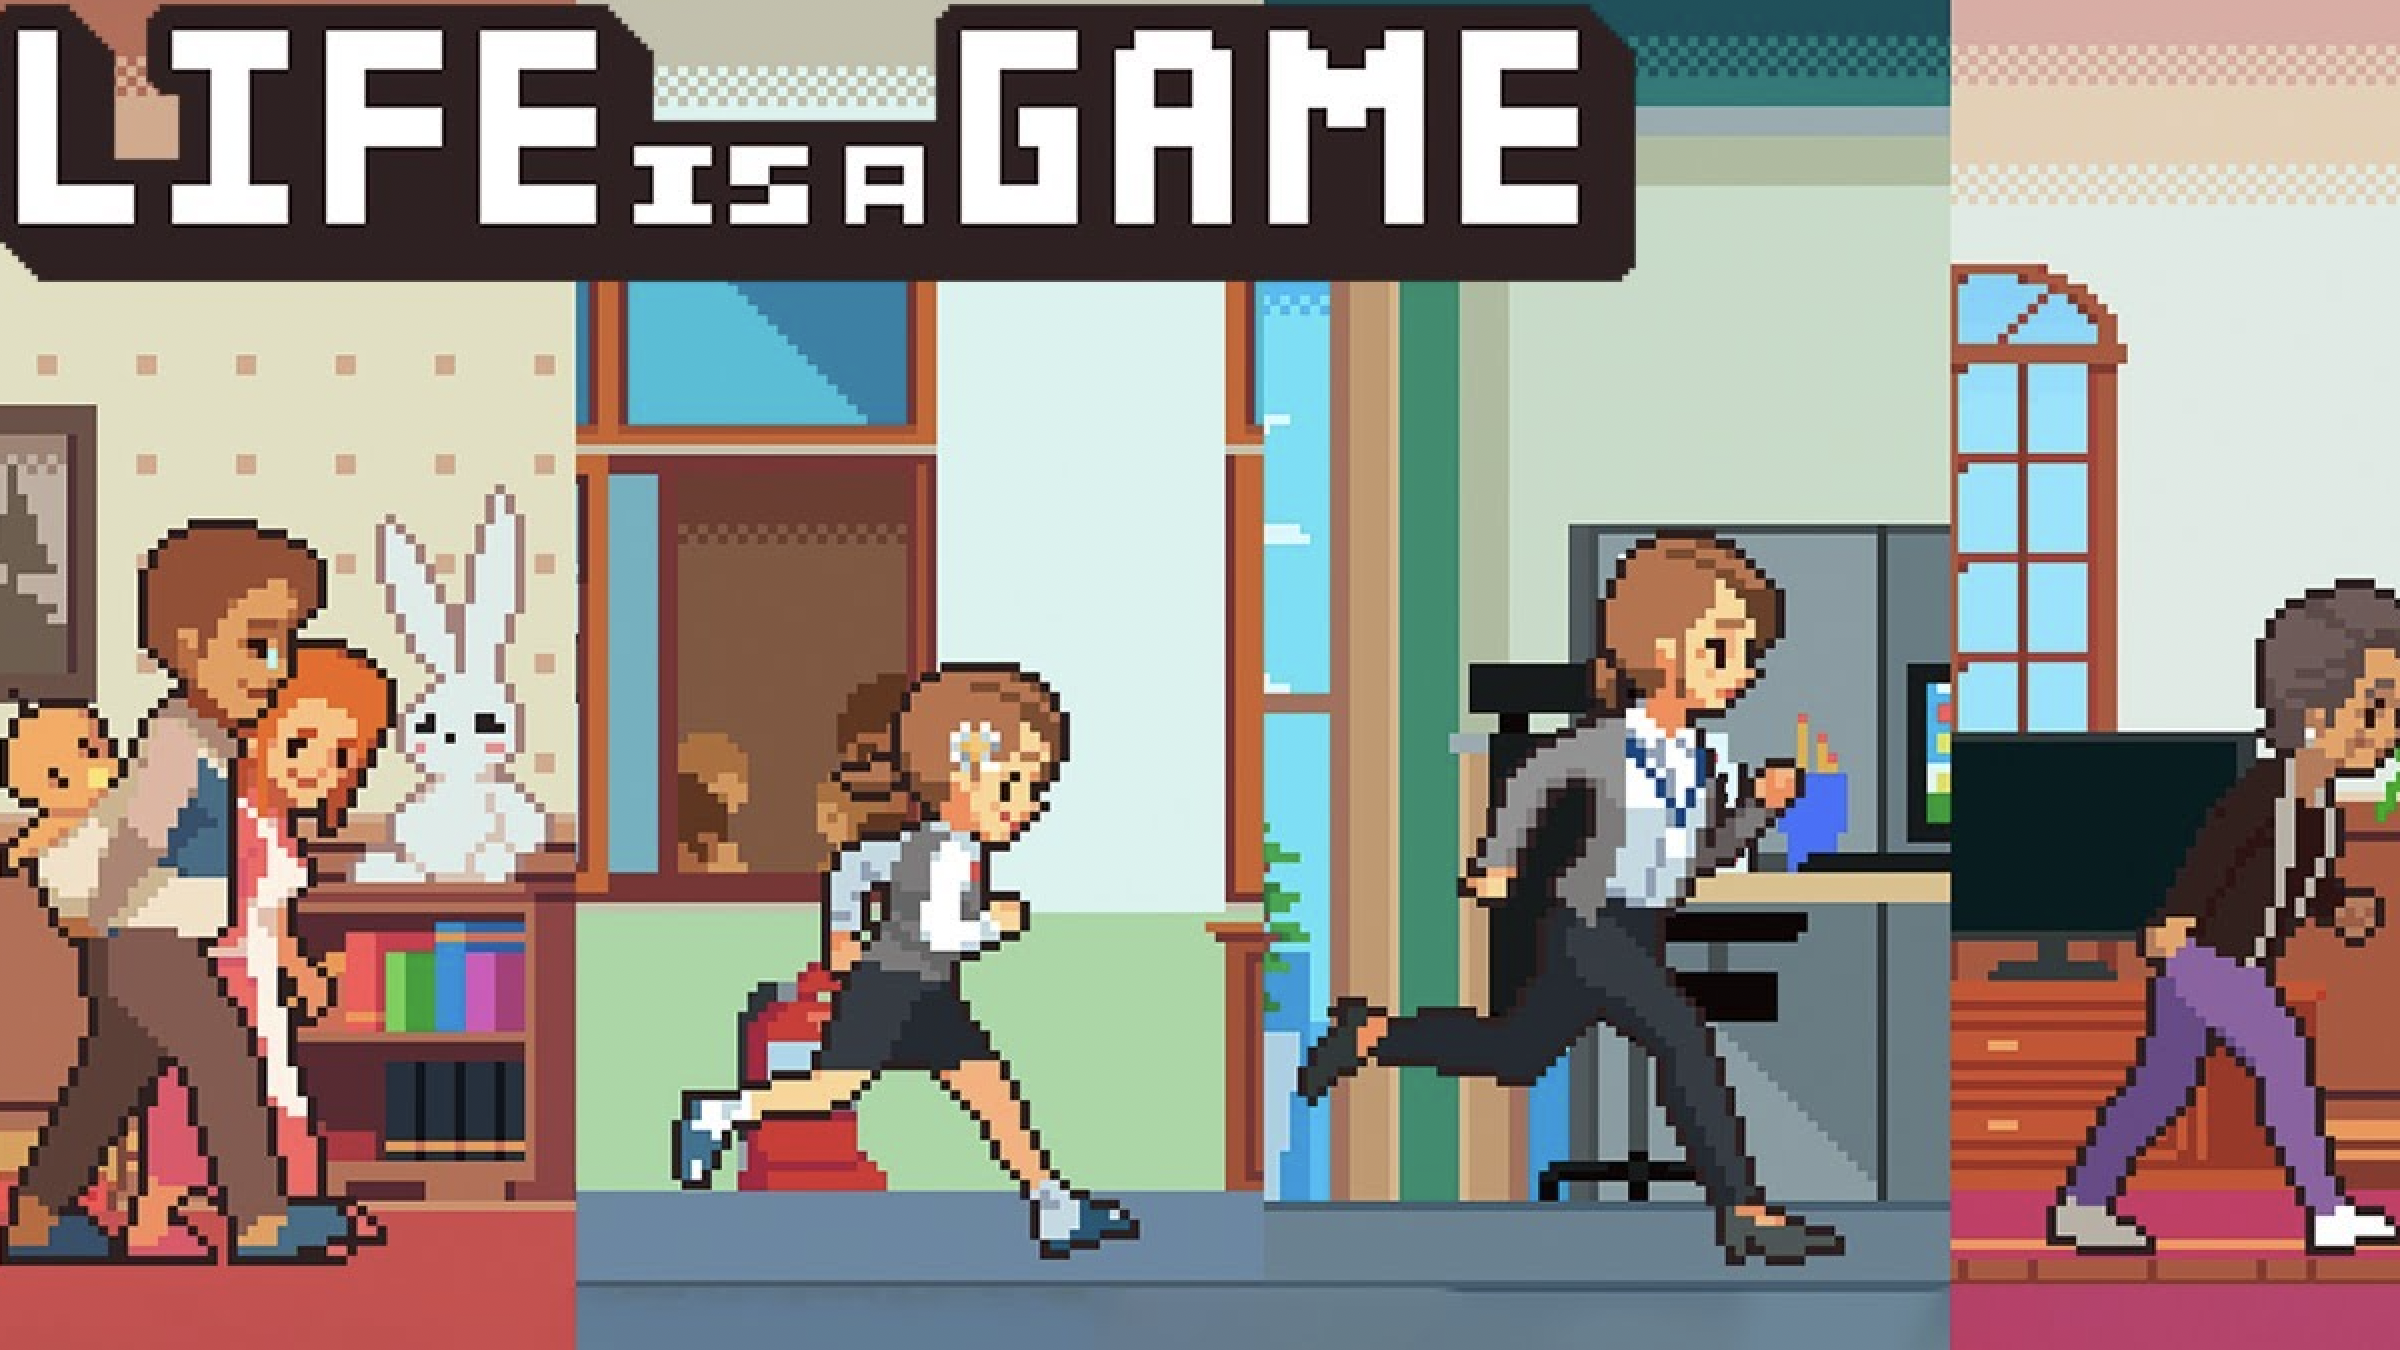 Test reads "Life is a Game" as four panels show the protagonist running as she ages from infancy to old age.